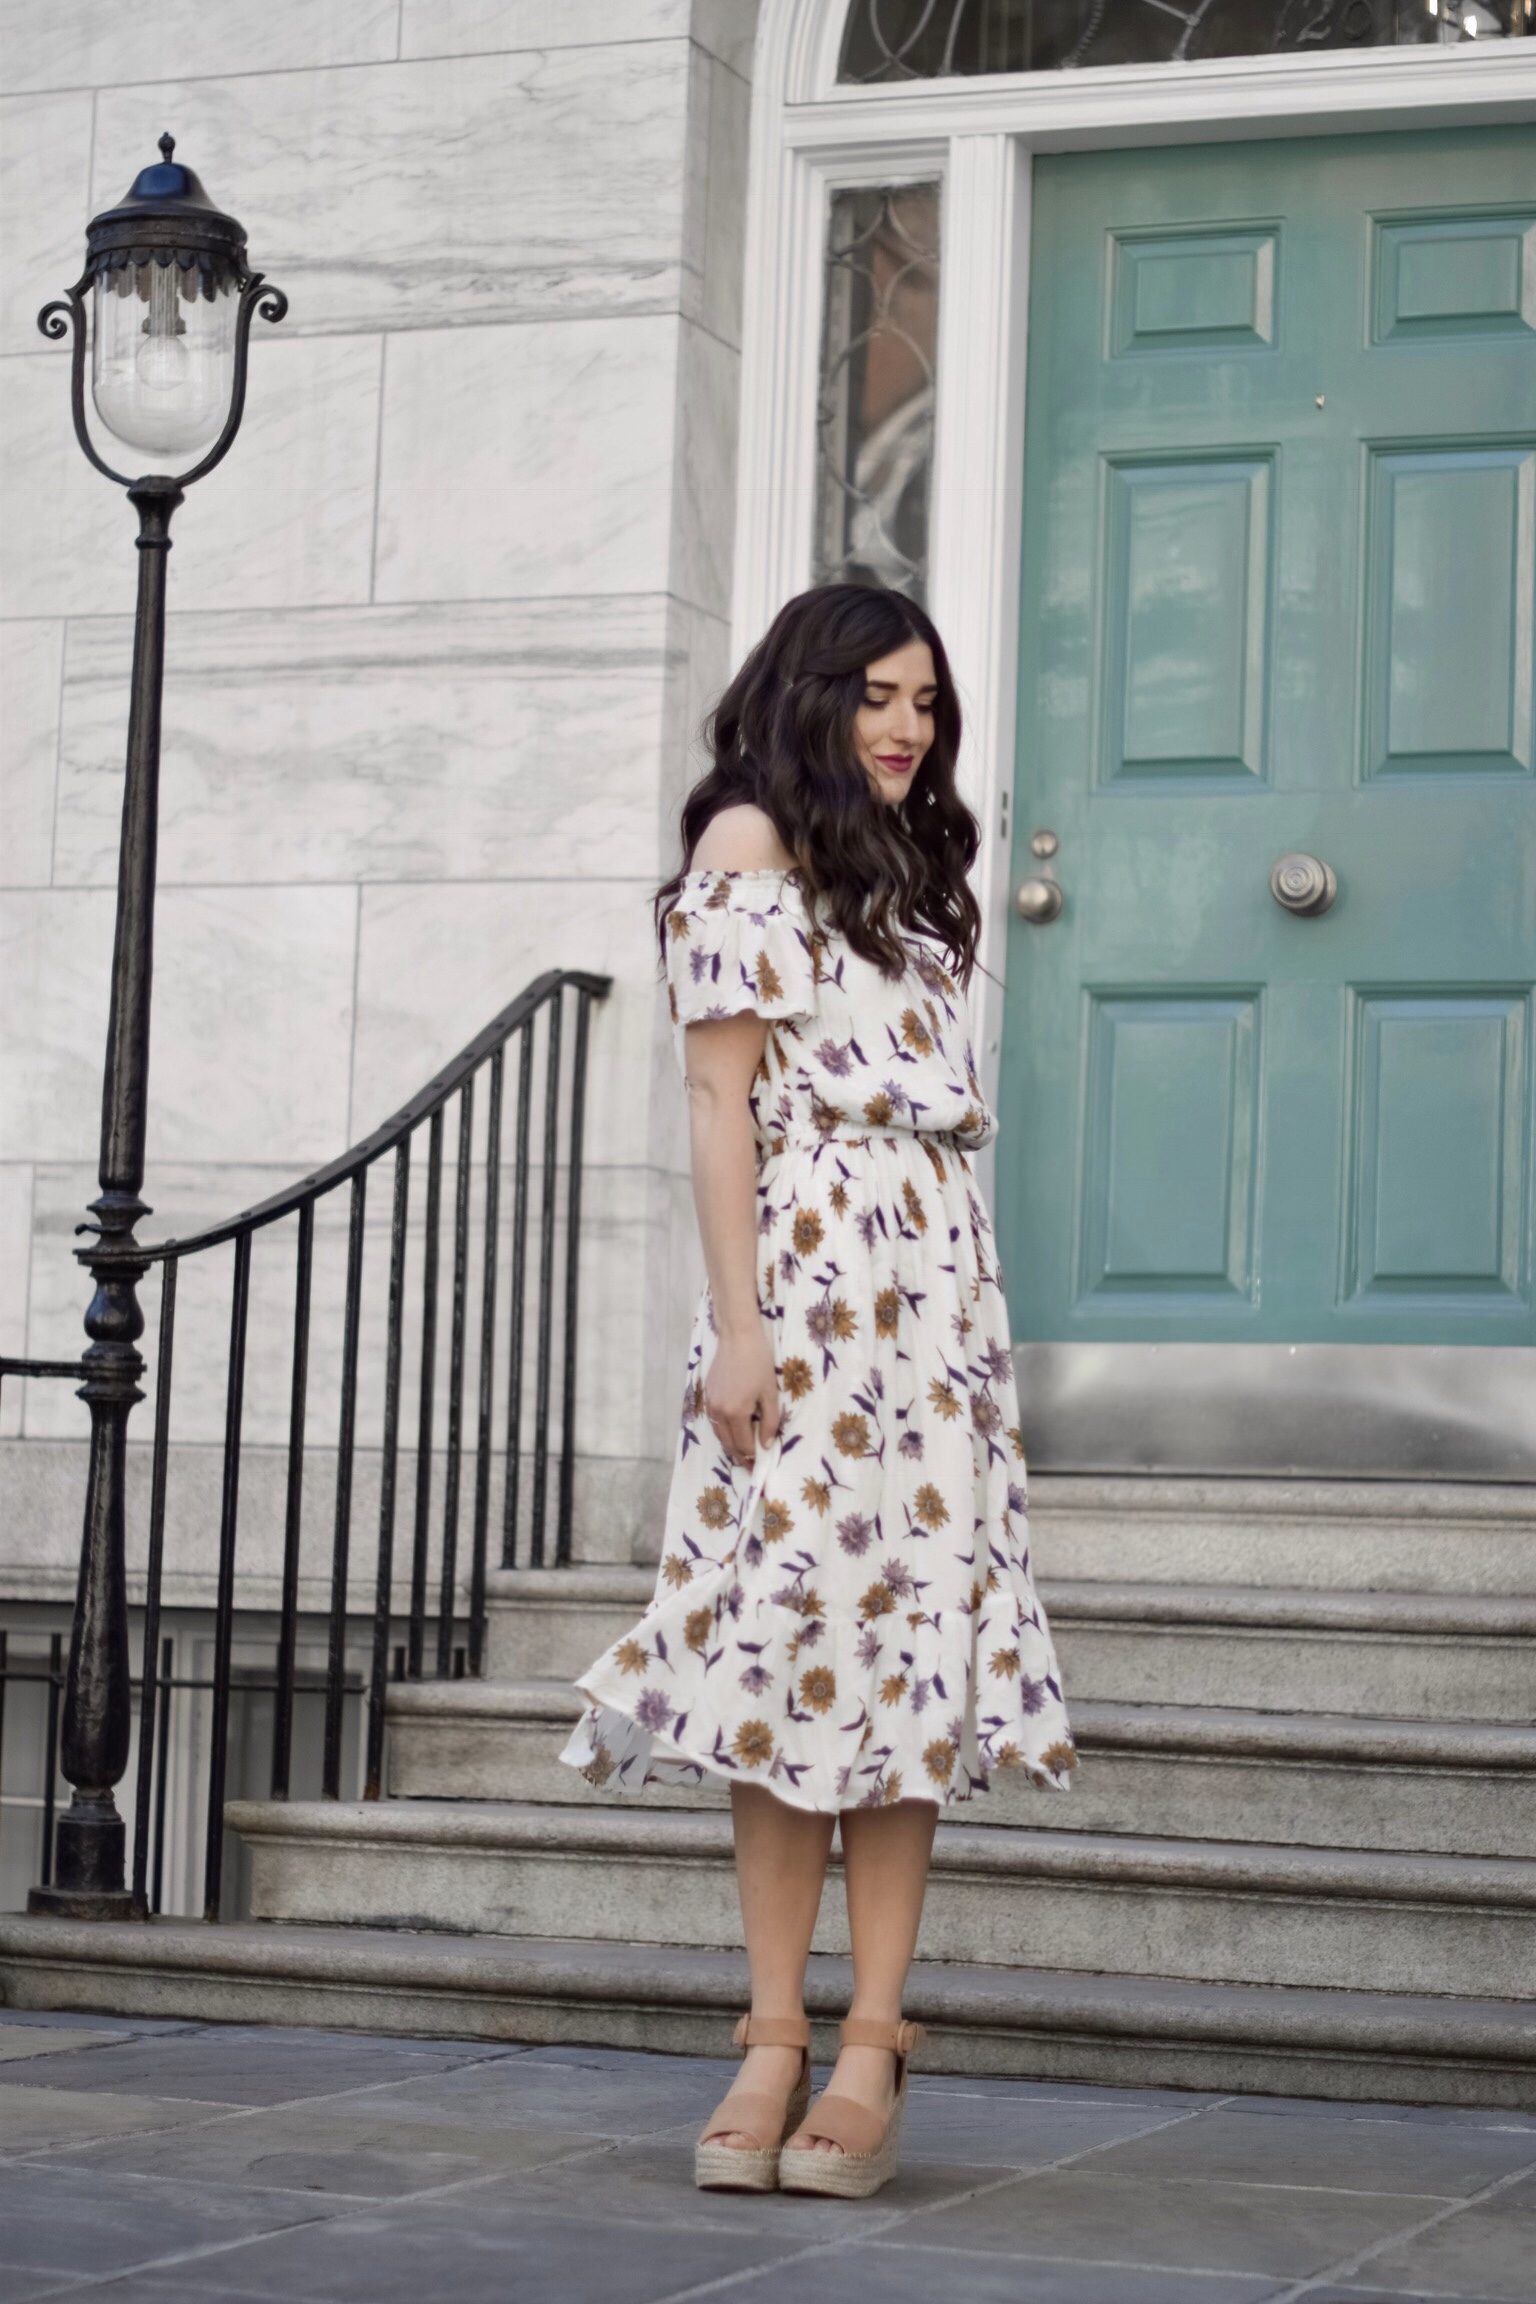 Floral Cold Shoulder Dress Espadrille Wedges My Top 3 Rules Of Business Esther Santer Fashion Blog NYC Street Style Blogger Outfit OOTD Trendy Old Navy Marc Fisher Beautiful Photoshoot New York City Summer Spring Shoes How To  Wear Shopping Wardrobe.jpg